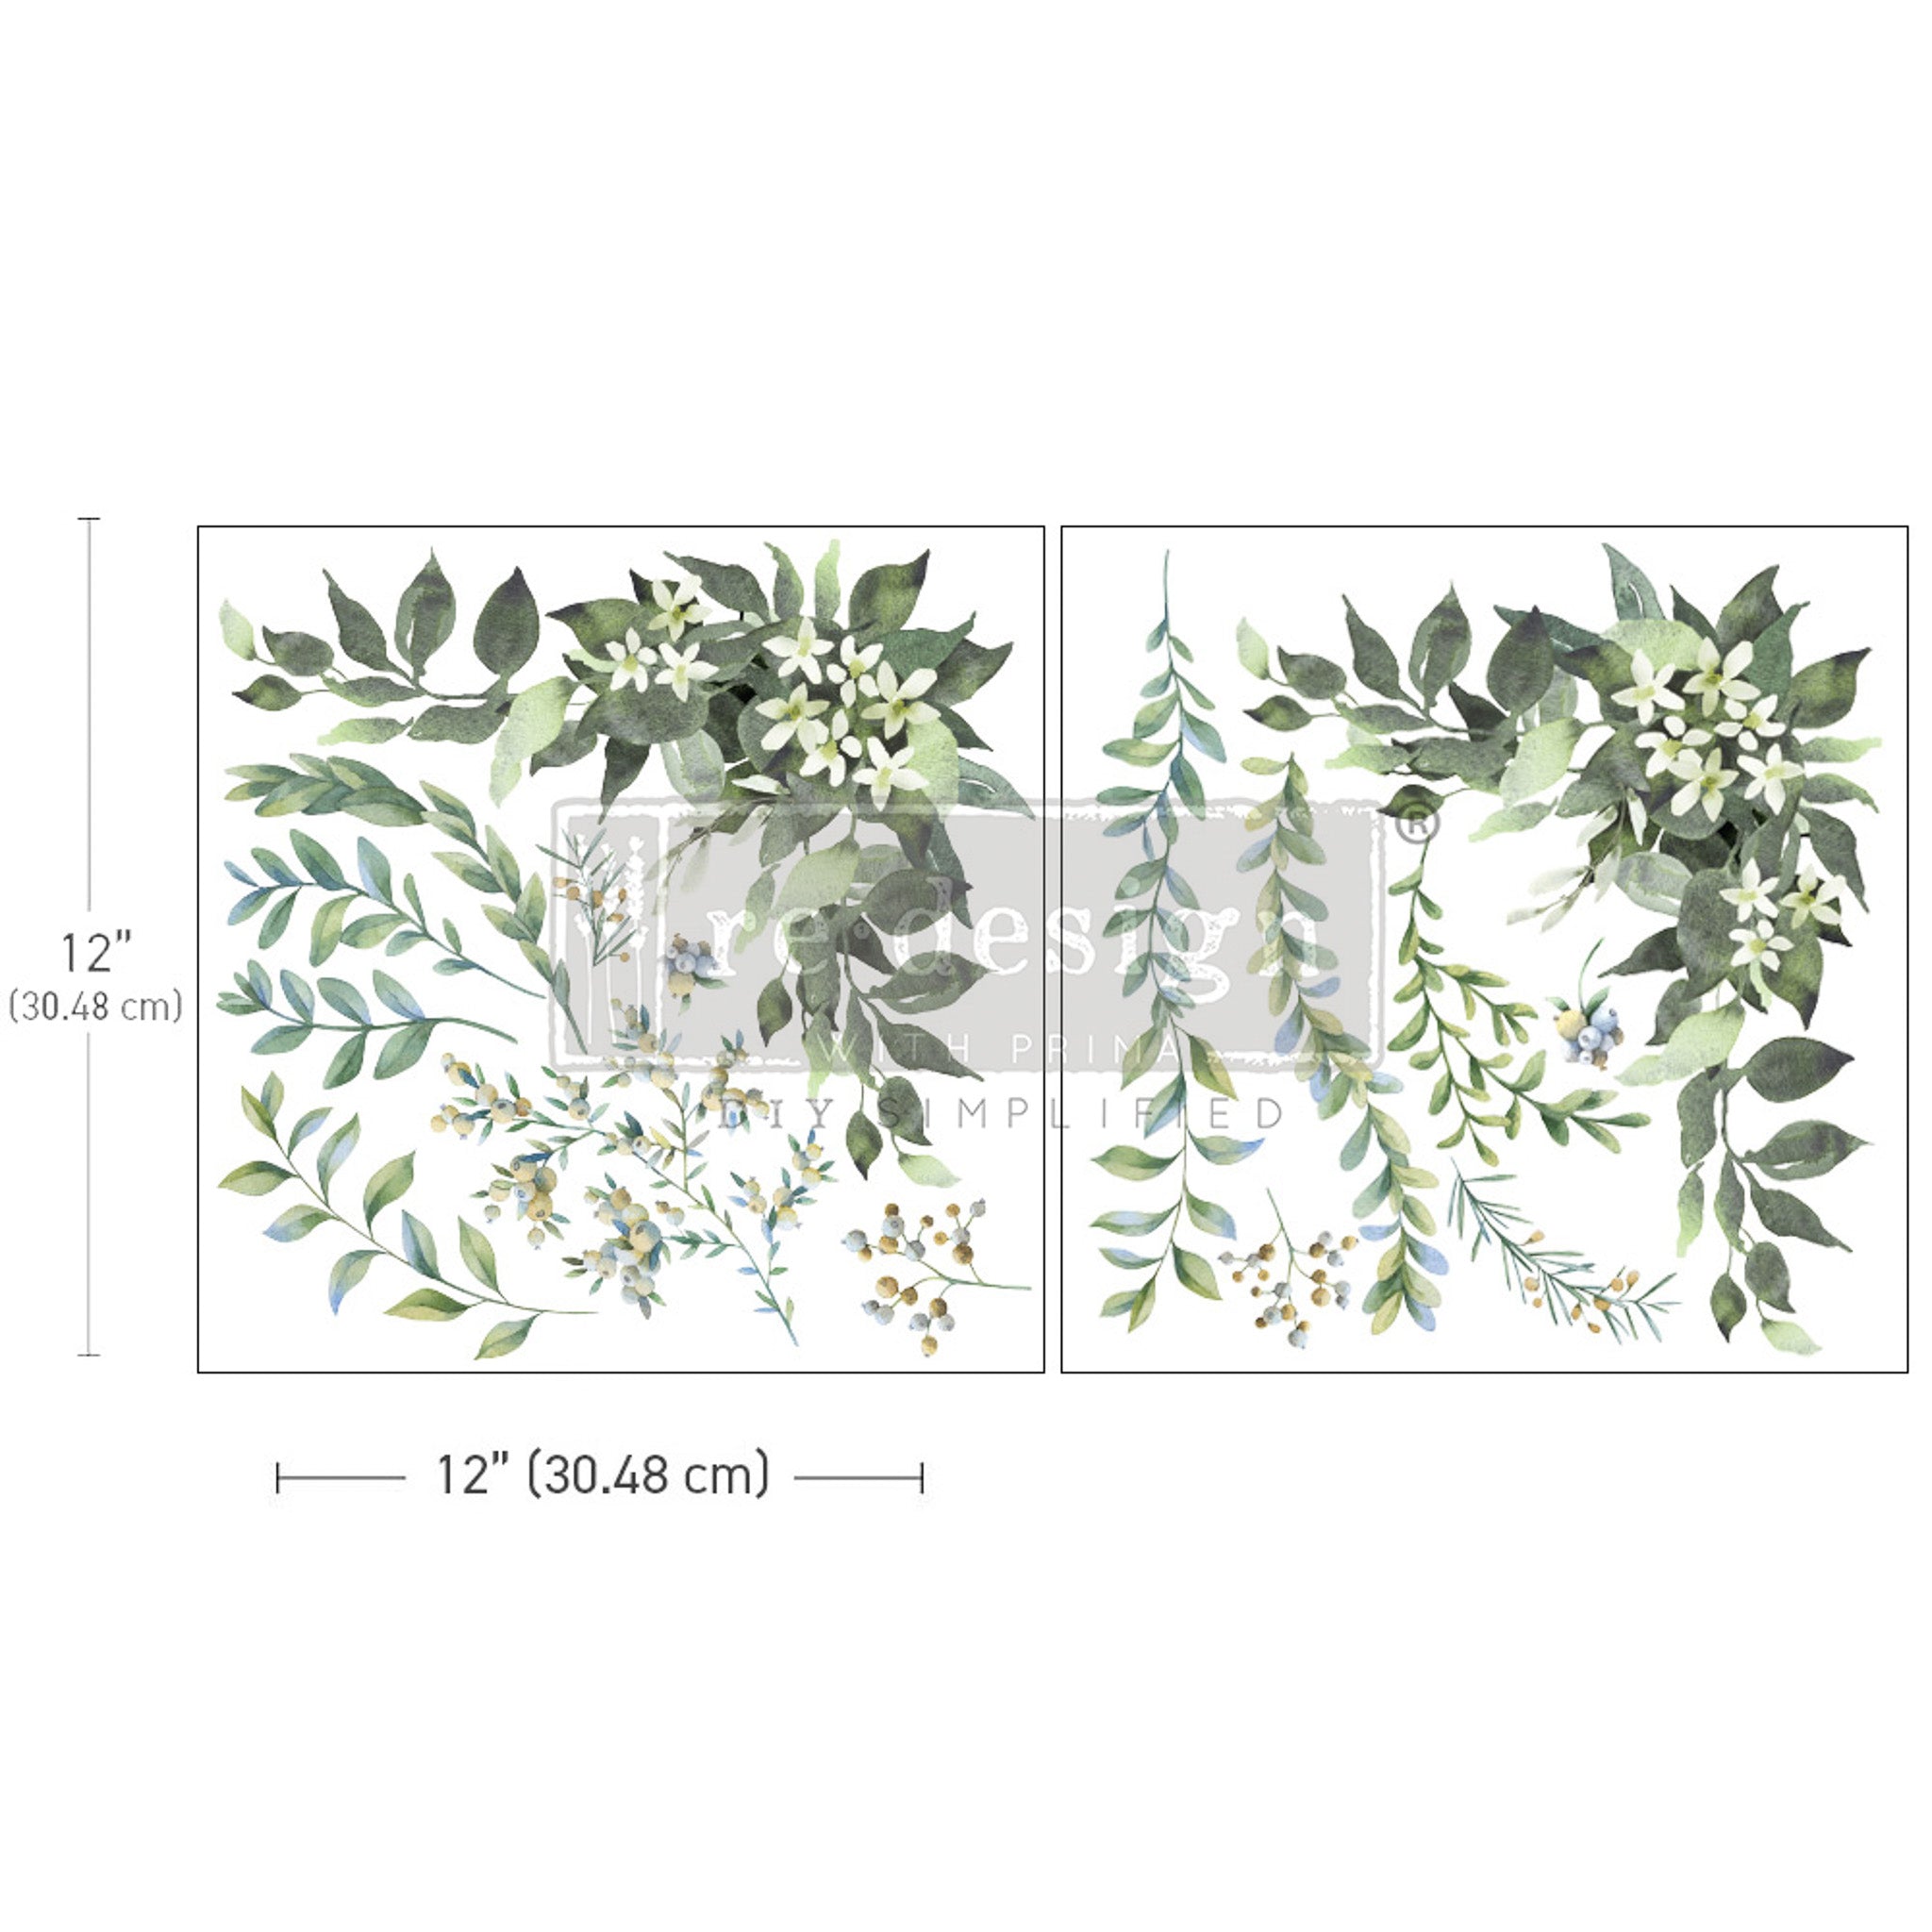 Two sheets of rub-on transfers that feature dainty white flowers against sprigs of greenery. Measurements for 1 sheet reads 12" (30.48 cm) by 12" (30.48 cm).